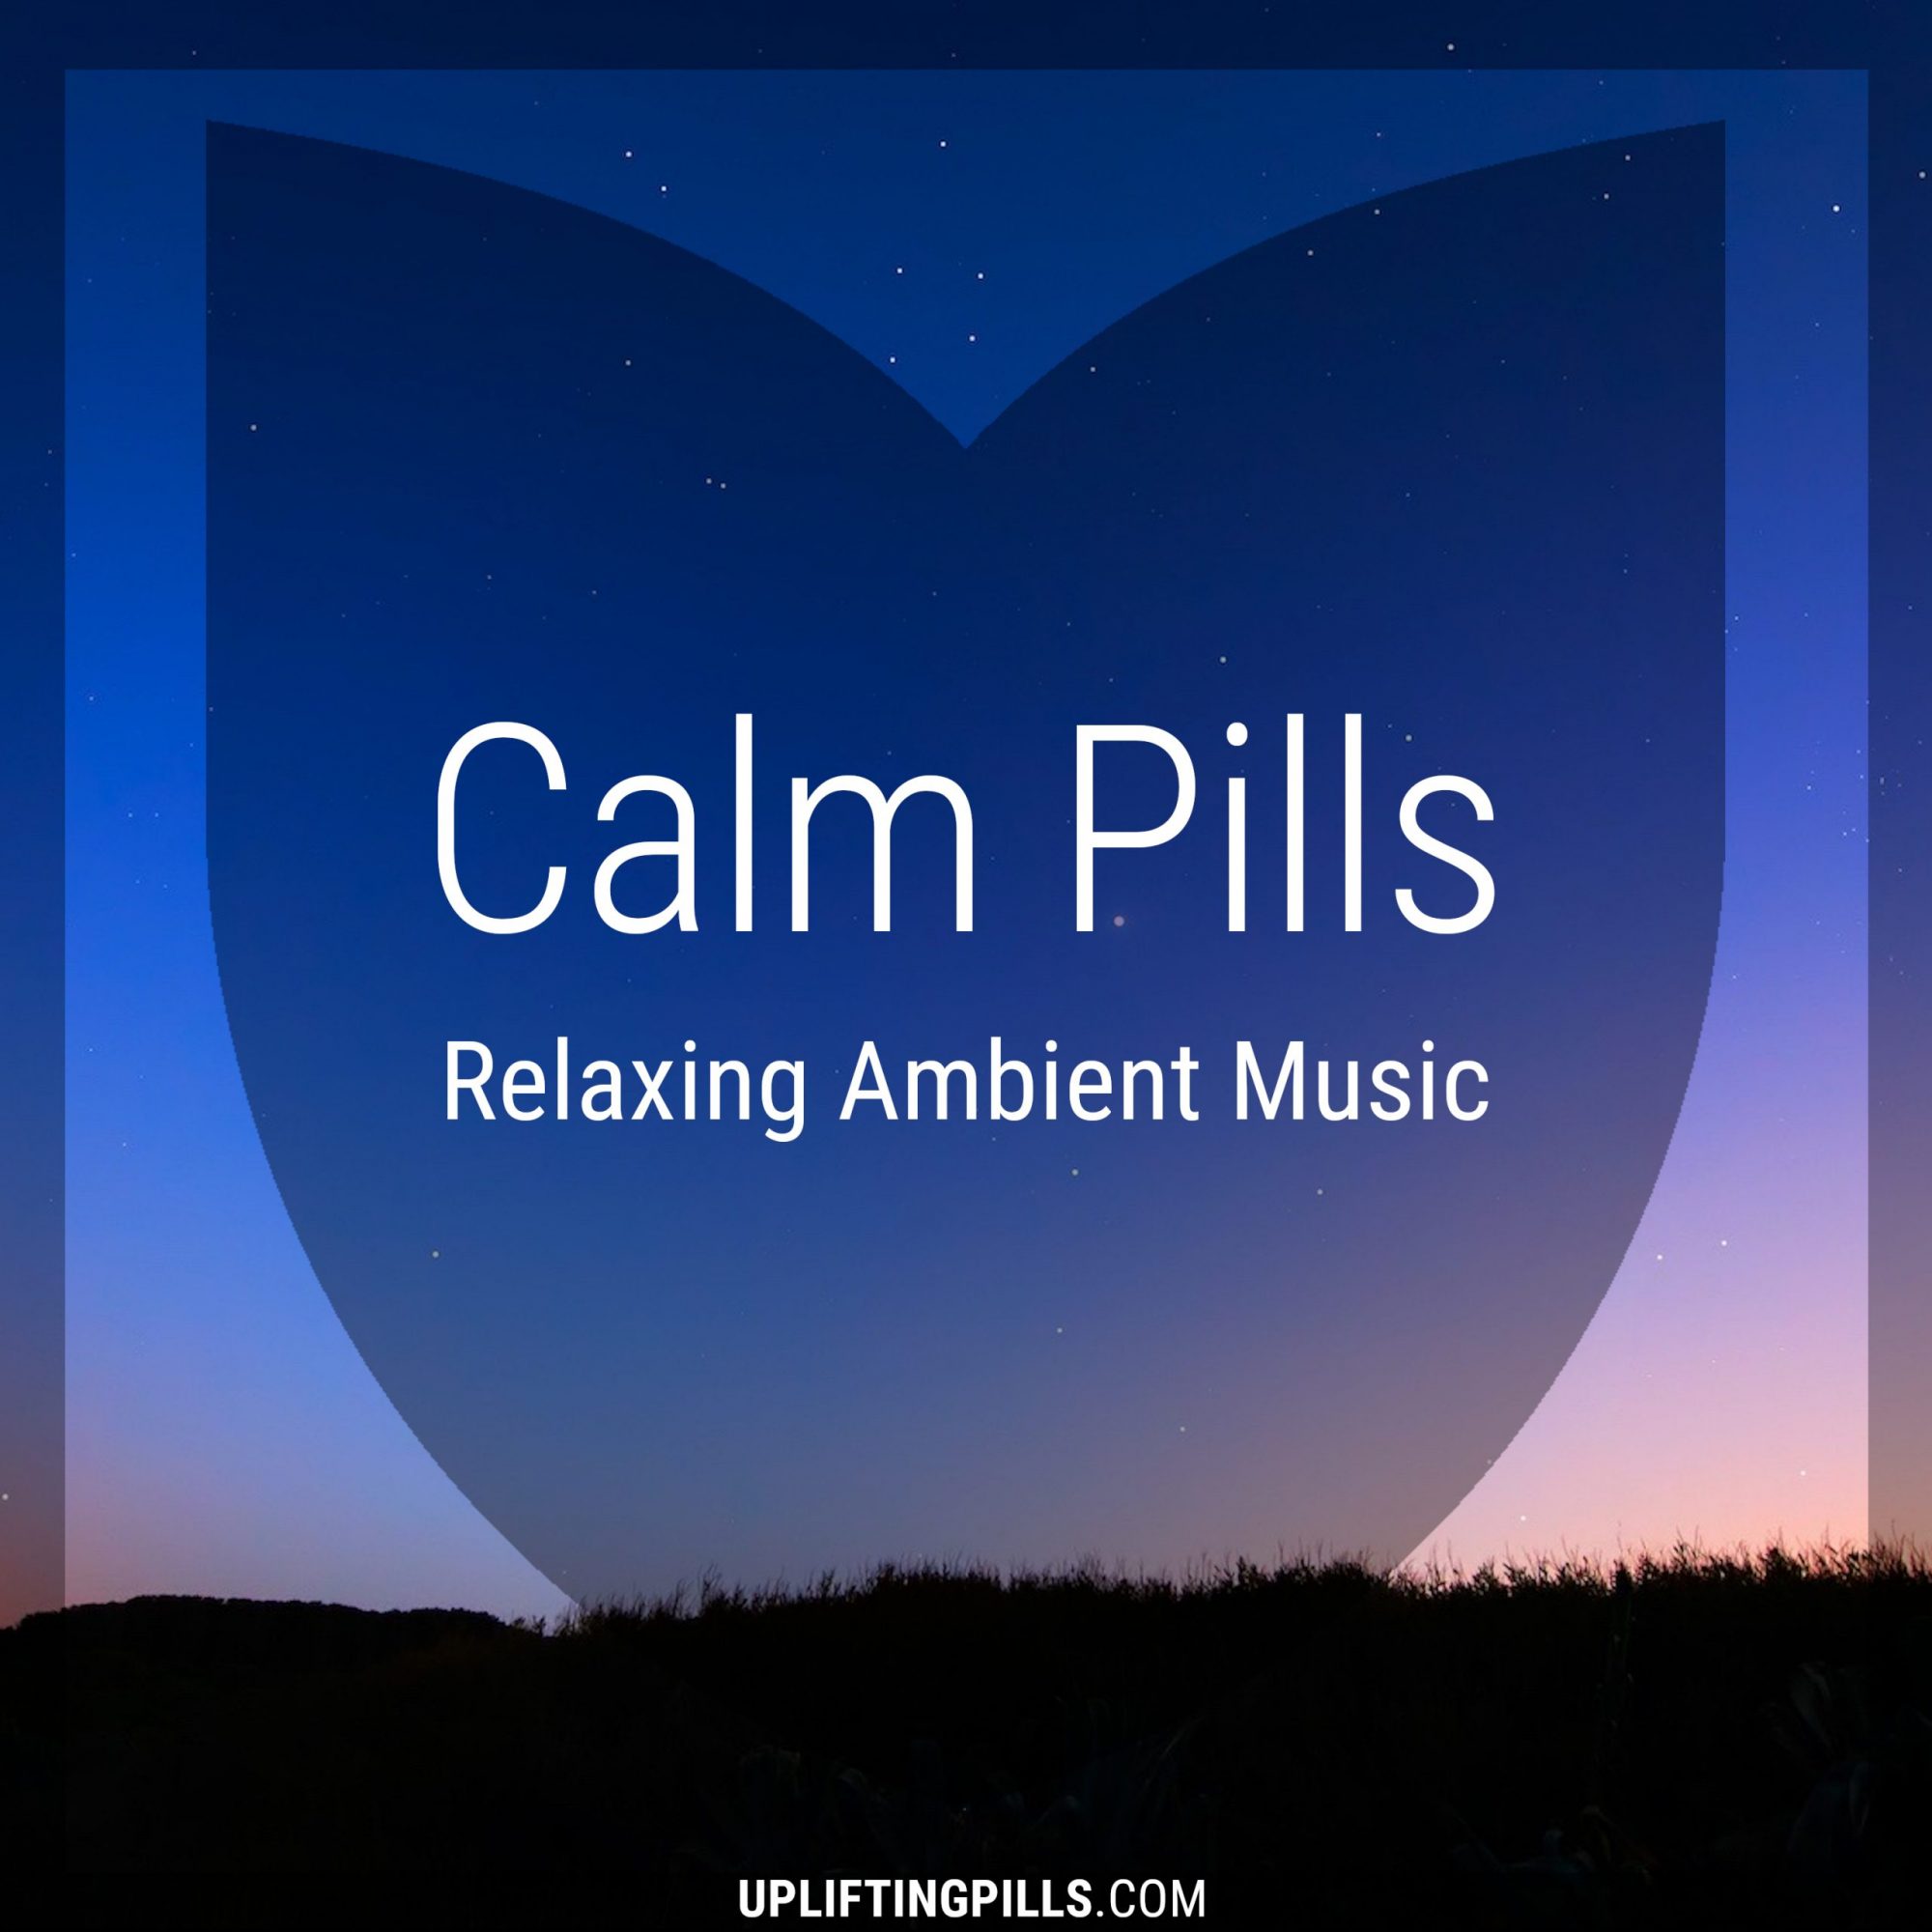 Calm Pills - Soothing Space Ambient and Piano Music for Relaxing, Peaceful Sleep, Reading or Mindful Meditation:Uplifting Pills